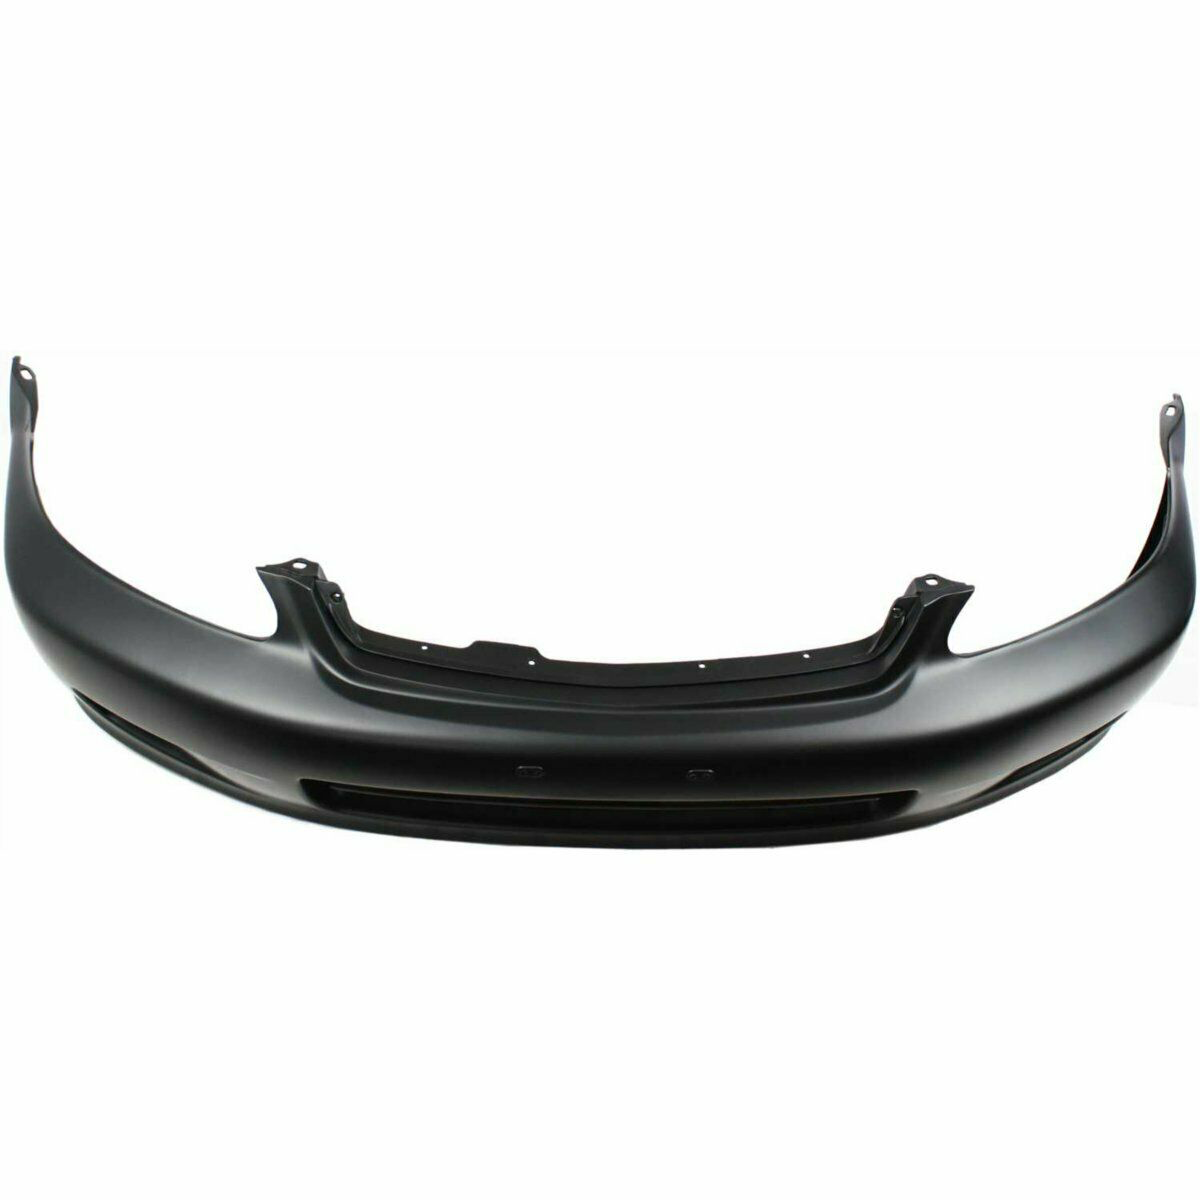 1999-2000 Honda Civic Coupe Front Bumper Painted to Match